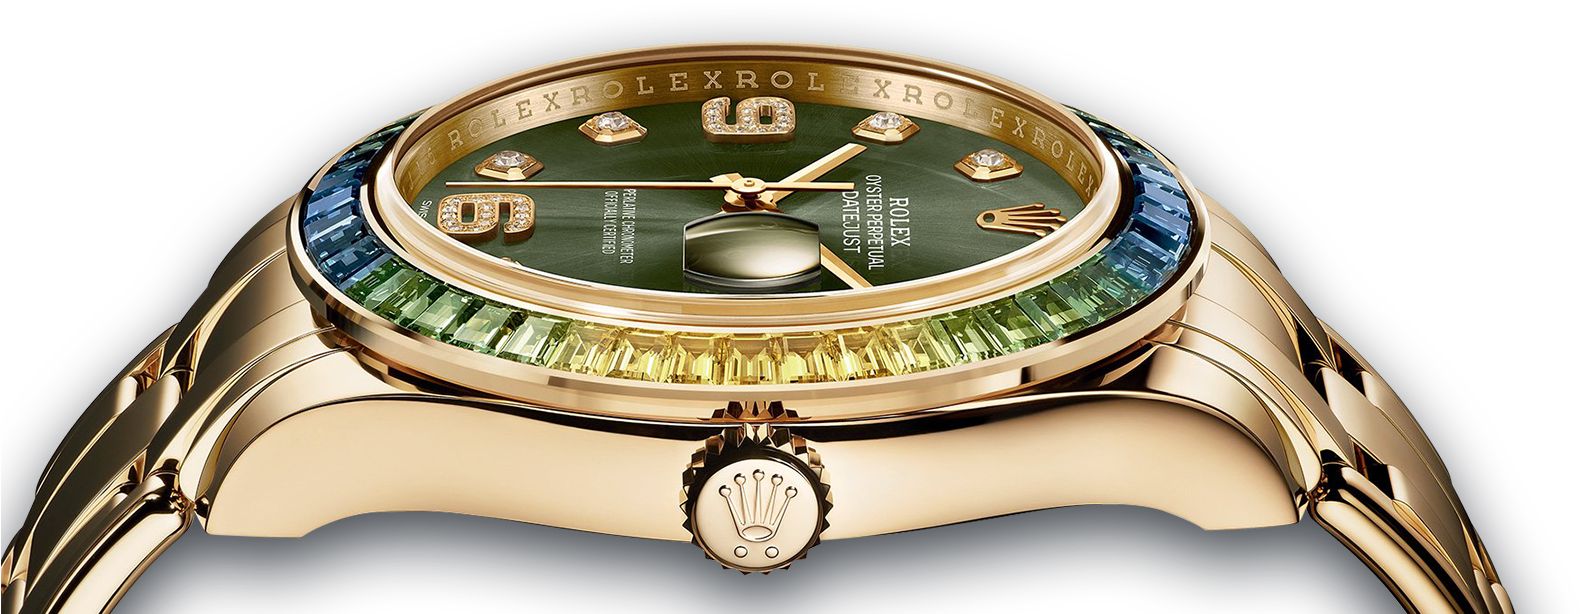 Rolex Png High Quality Image - Rolex Png (1024x336), Png Download